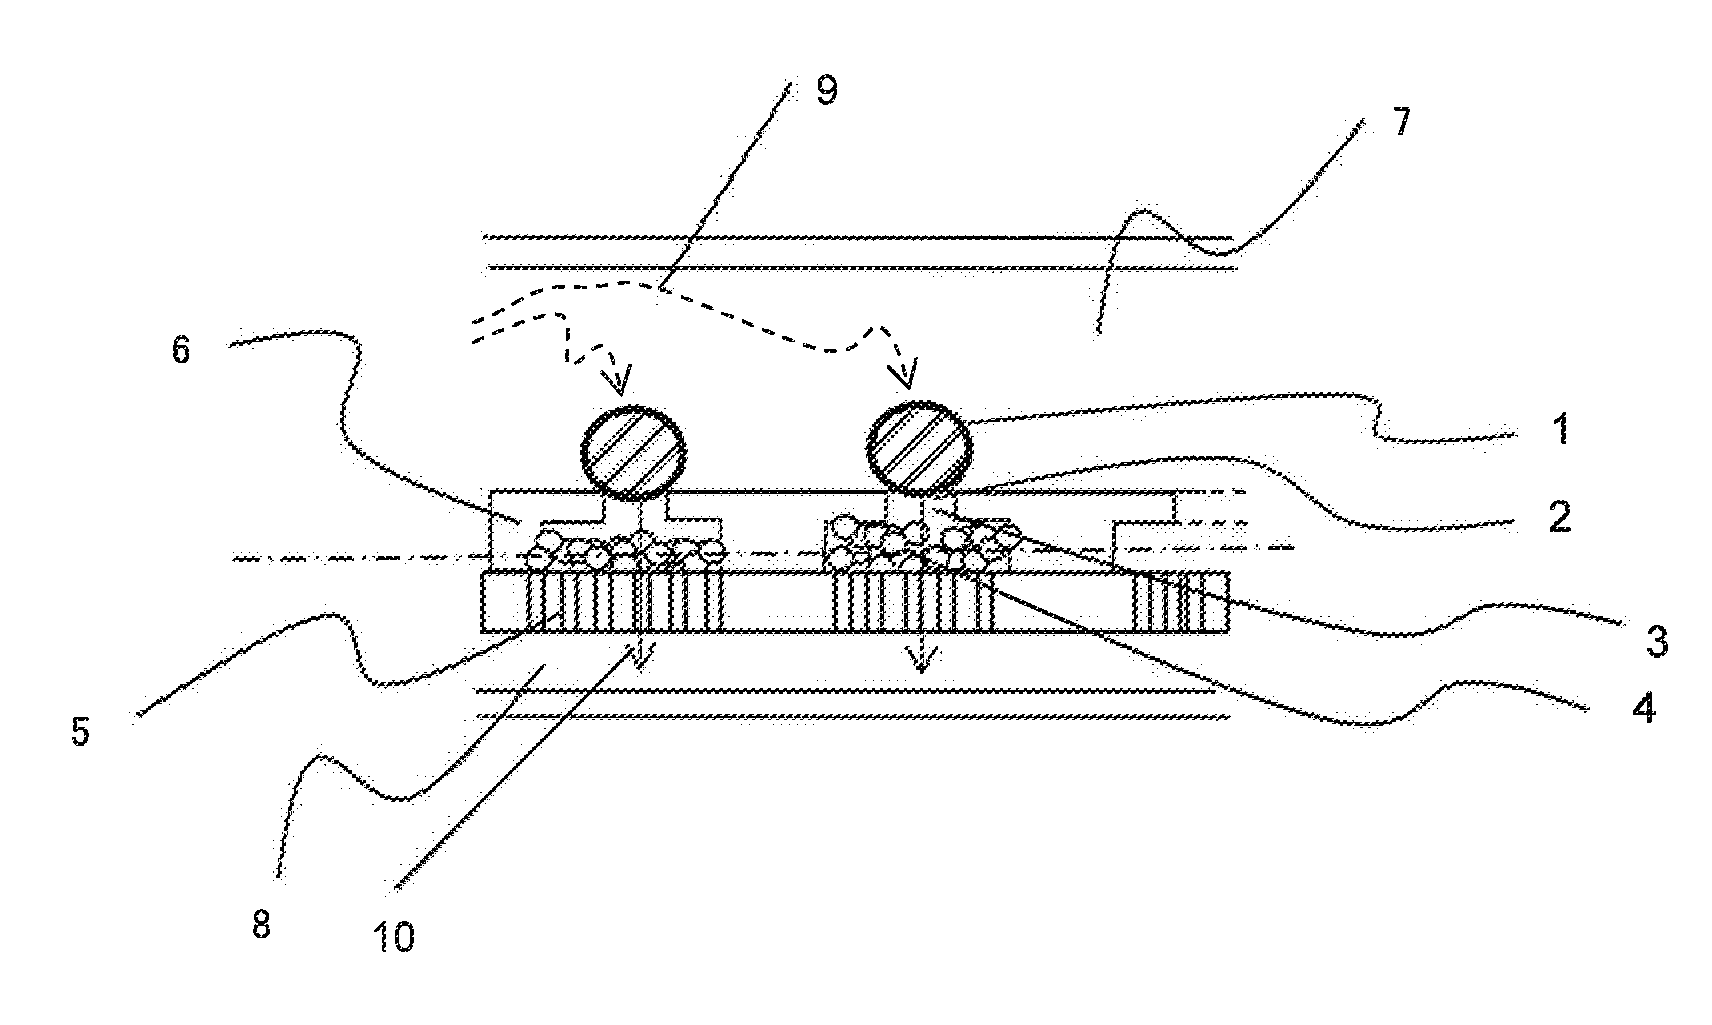 Two-Dimensional Cell Array Device and Apparatus for Gene Quantification and Sequence Analysis